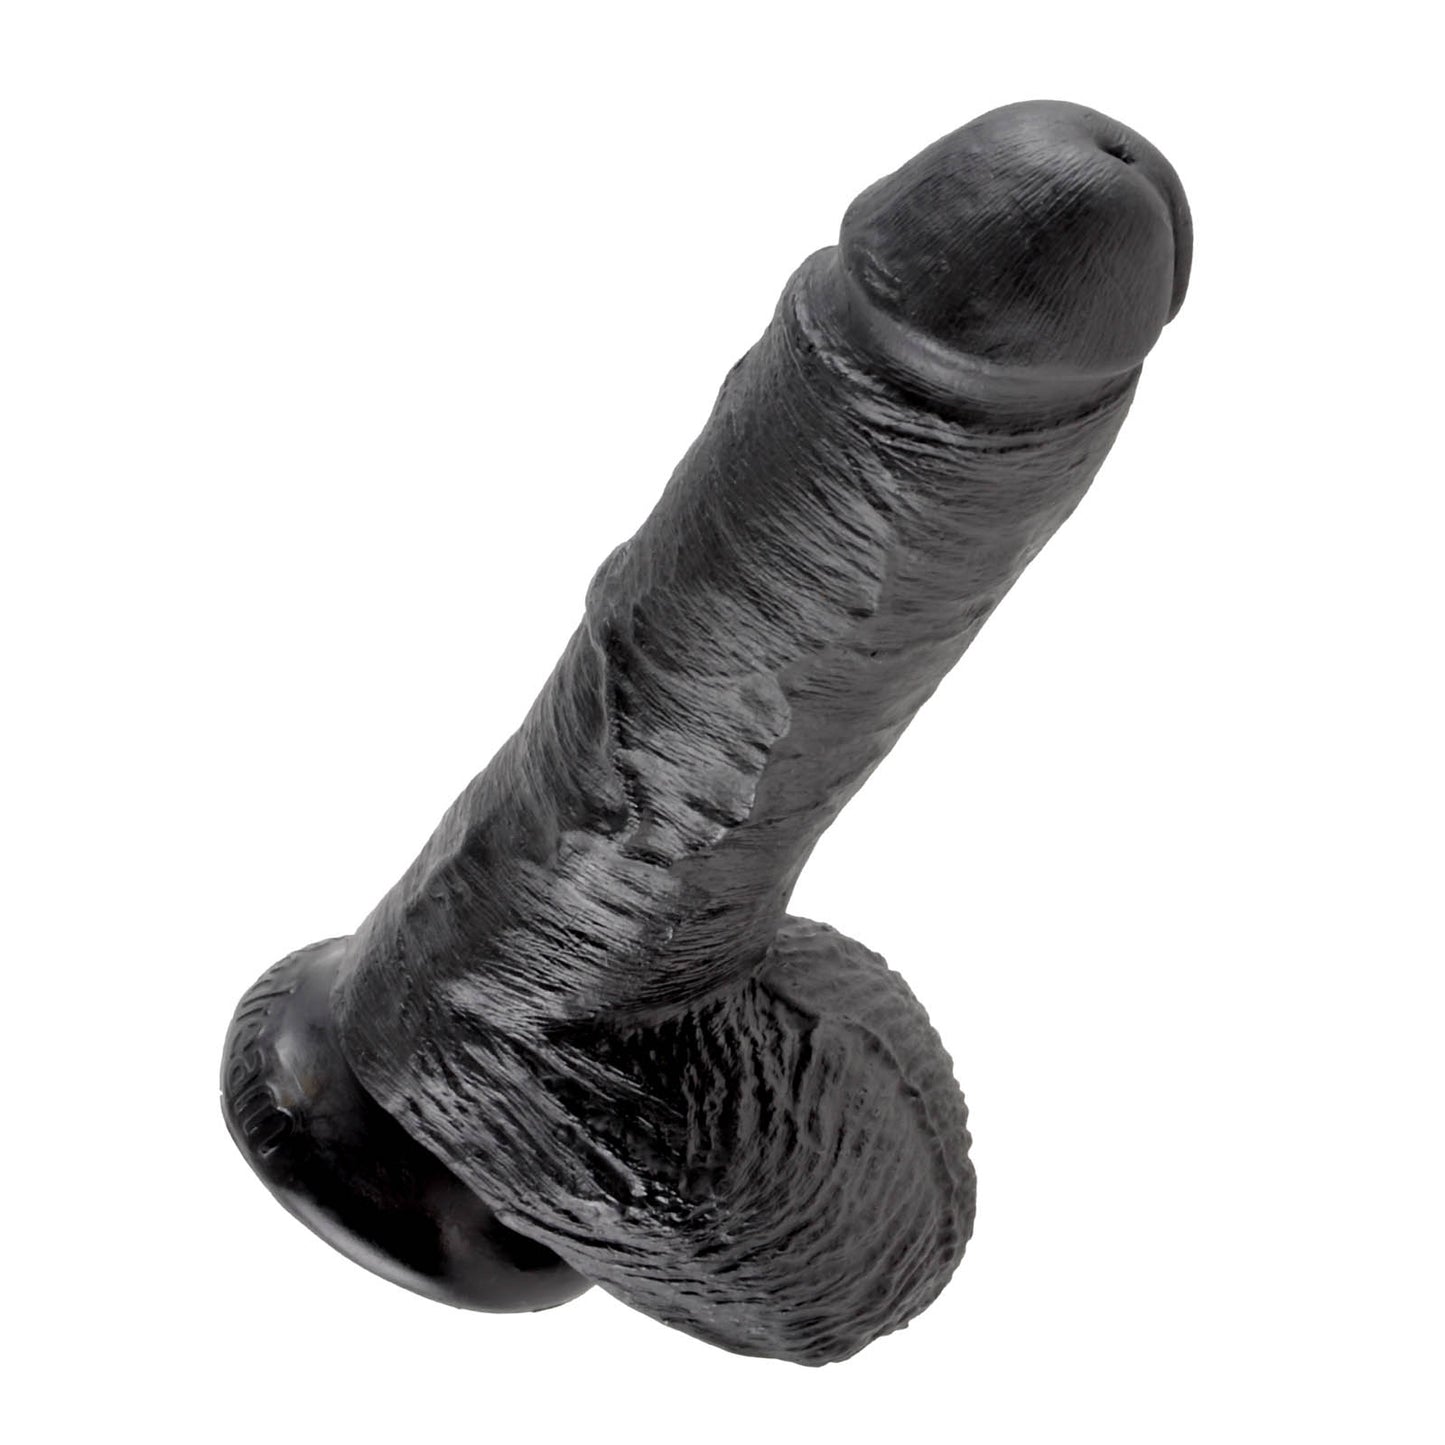 King Cock Ultra Realistic 8 Inch Black Suction Cup Dildo With Balls